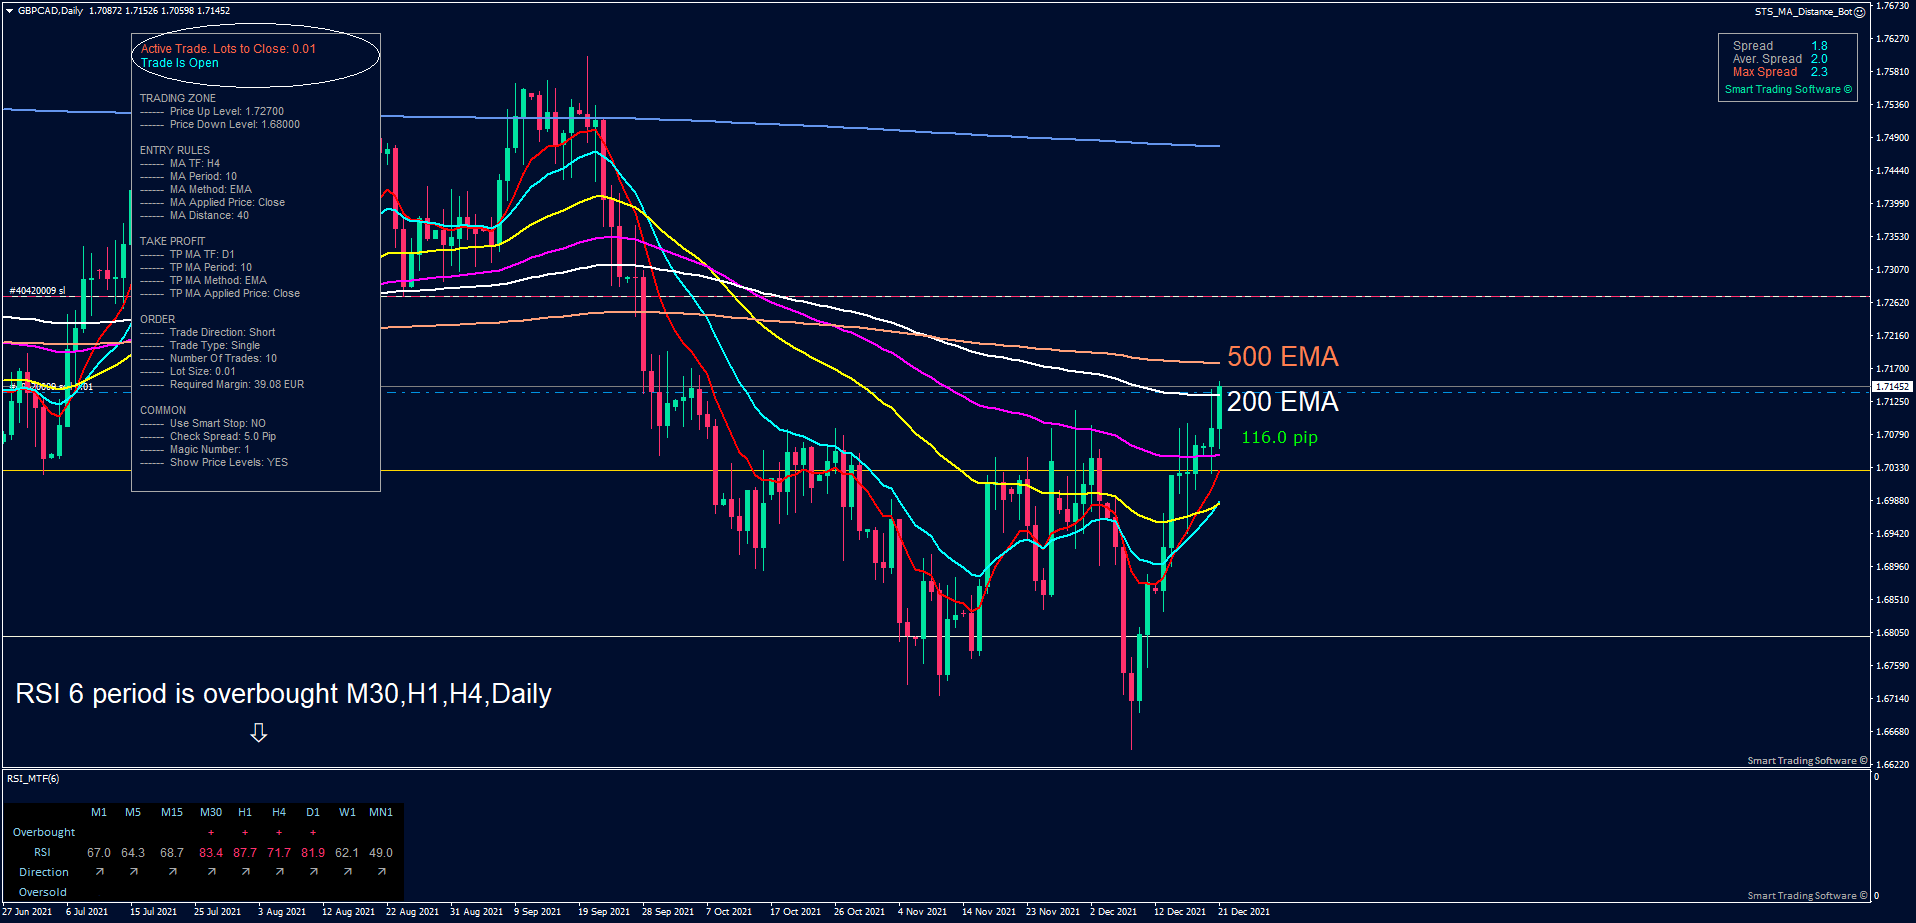 GBP/CAD Daily chart